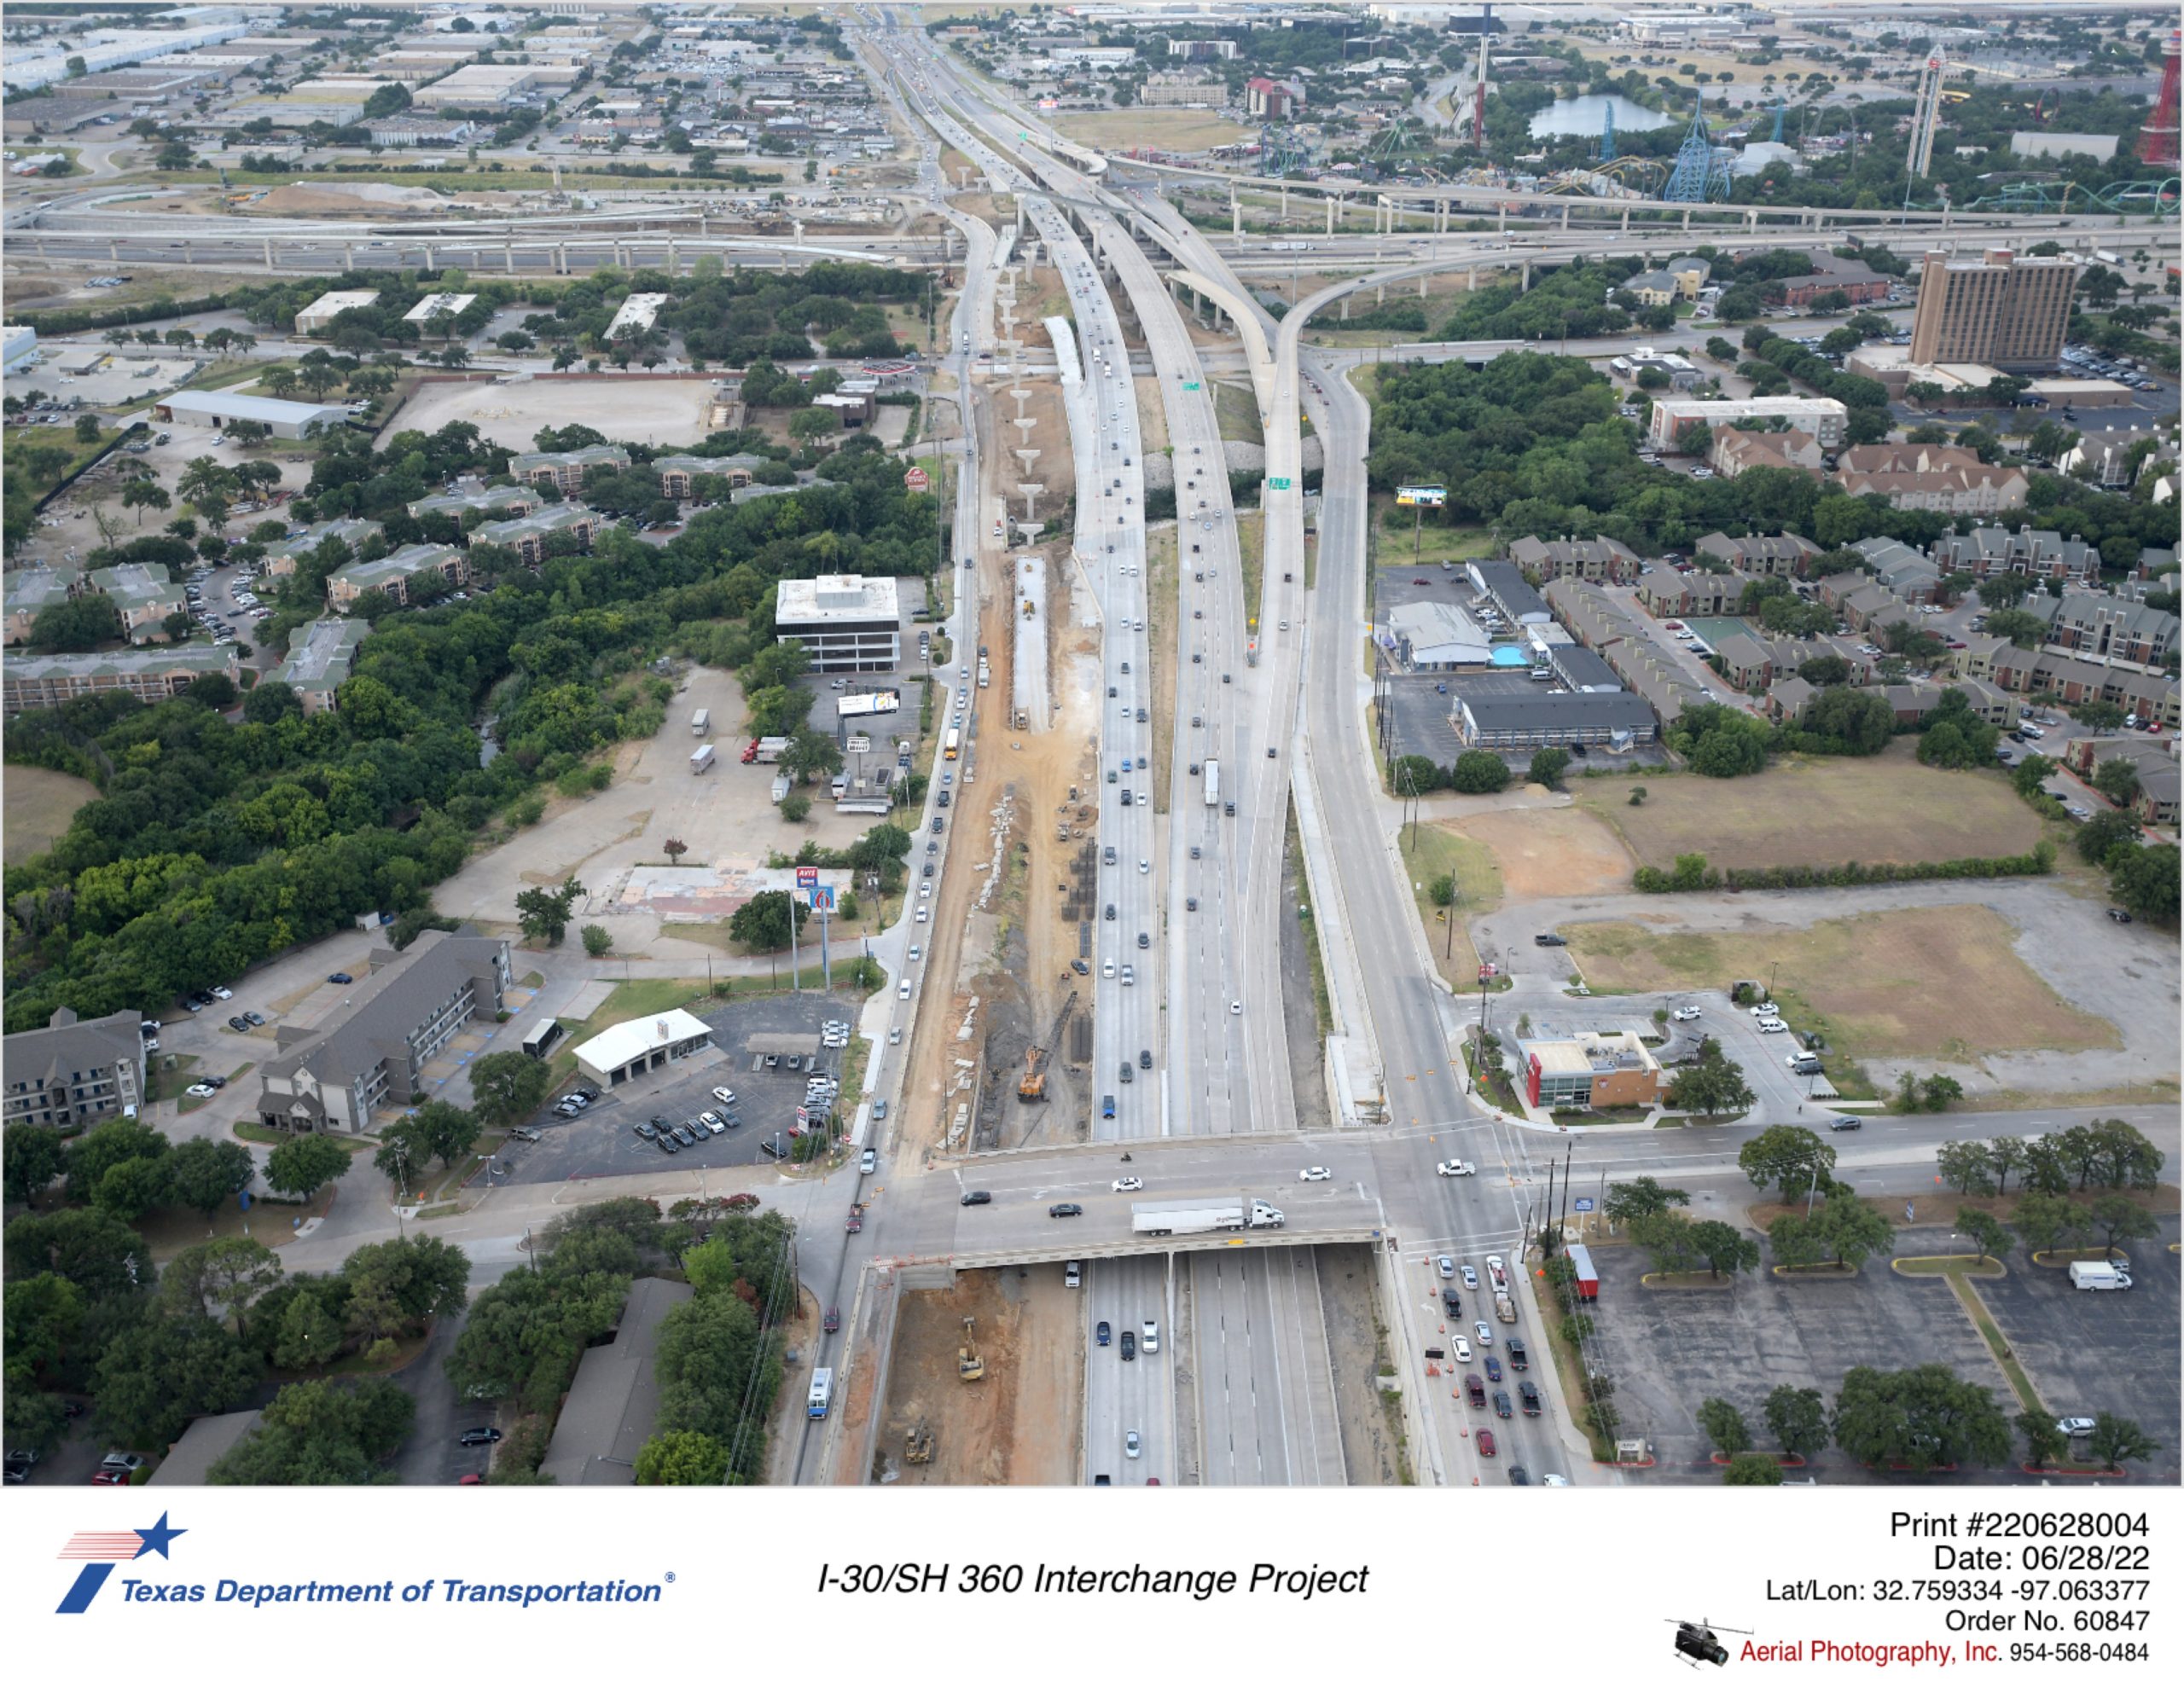 SH 360 looking south over Ave J interchange shown in foreground. Construction of northbound frontage road and retaining walls facing northbound mainlanes is shown.